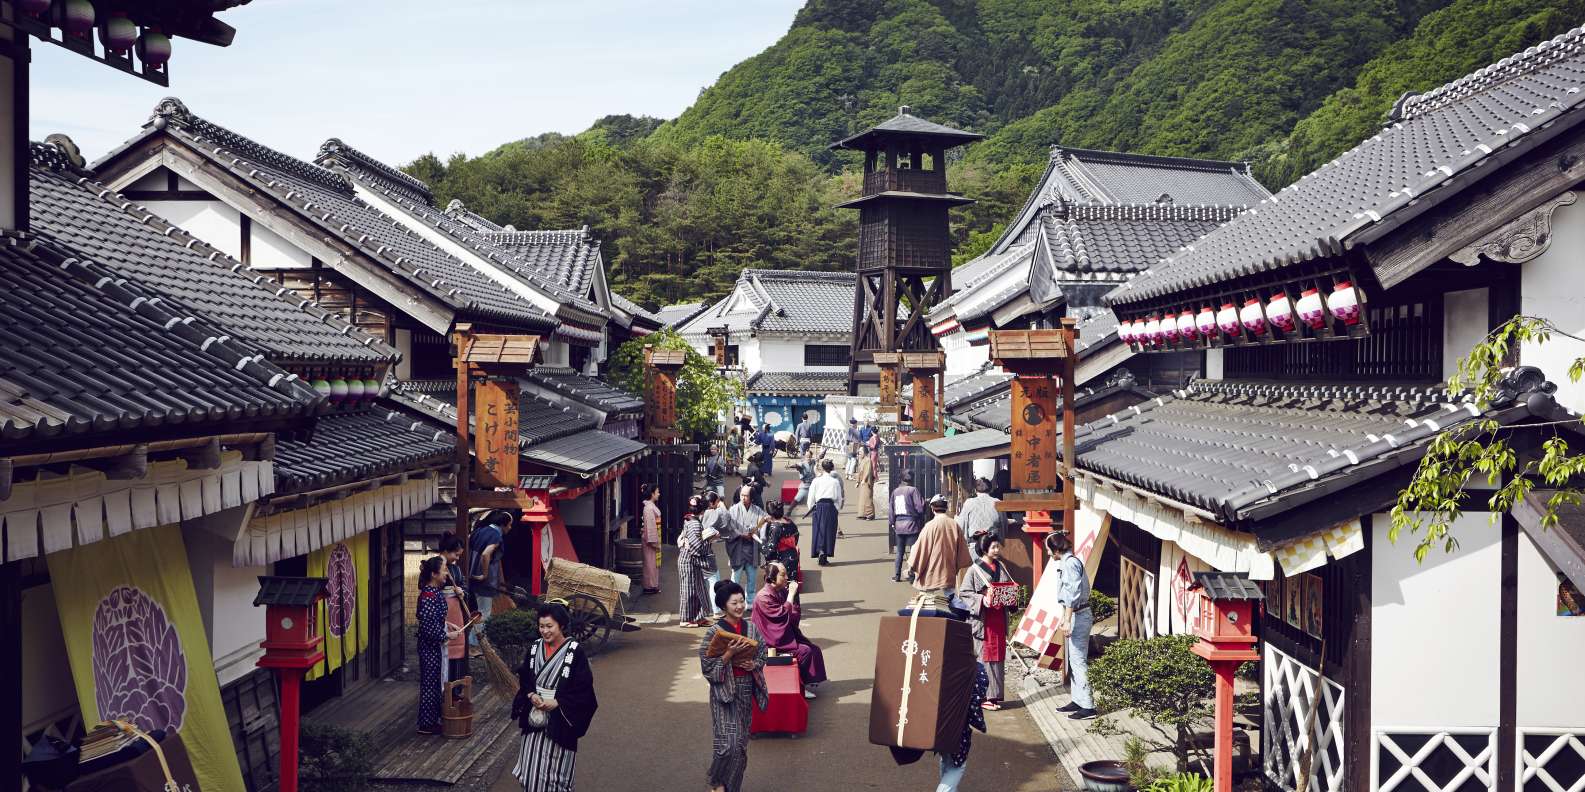 What to do in Nikko